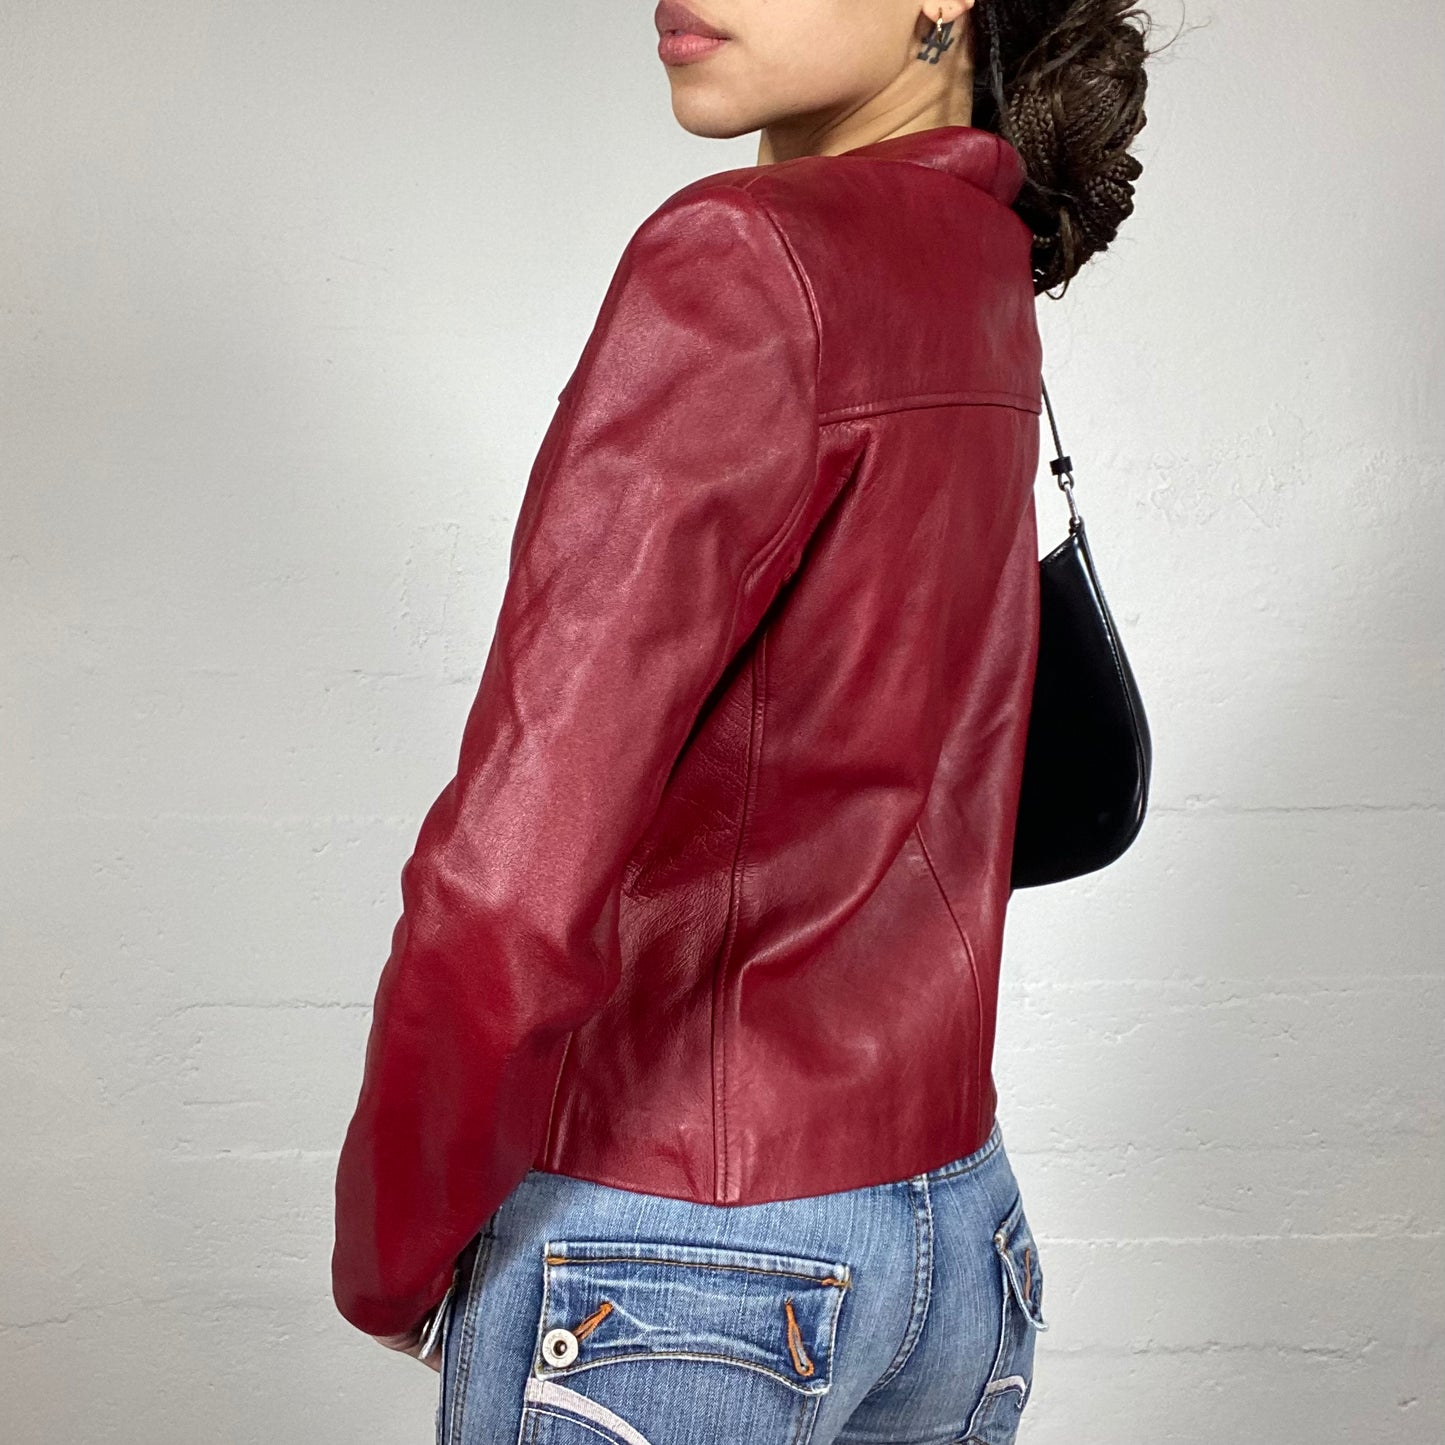 Vintage 2000 Classic Dark Red Leather Jacket with Buttons (M)